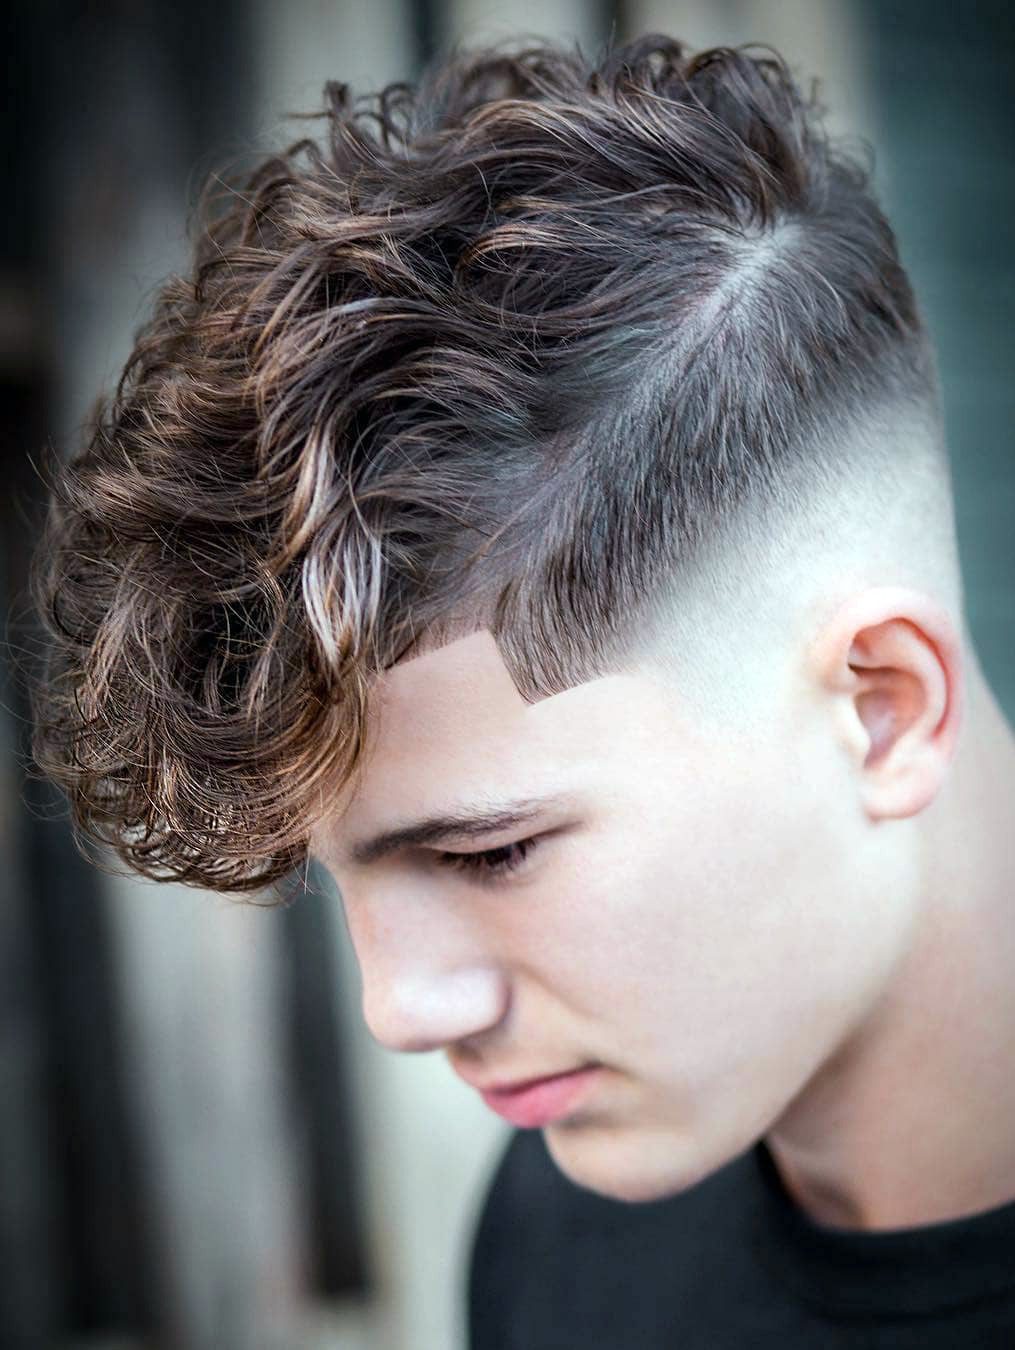 100 Modern Men's Hairstyles for Curly Hair | Haircut Inspiration